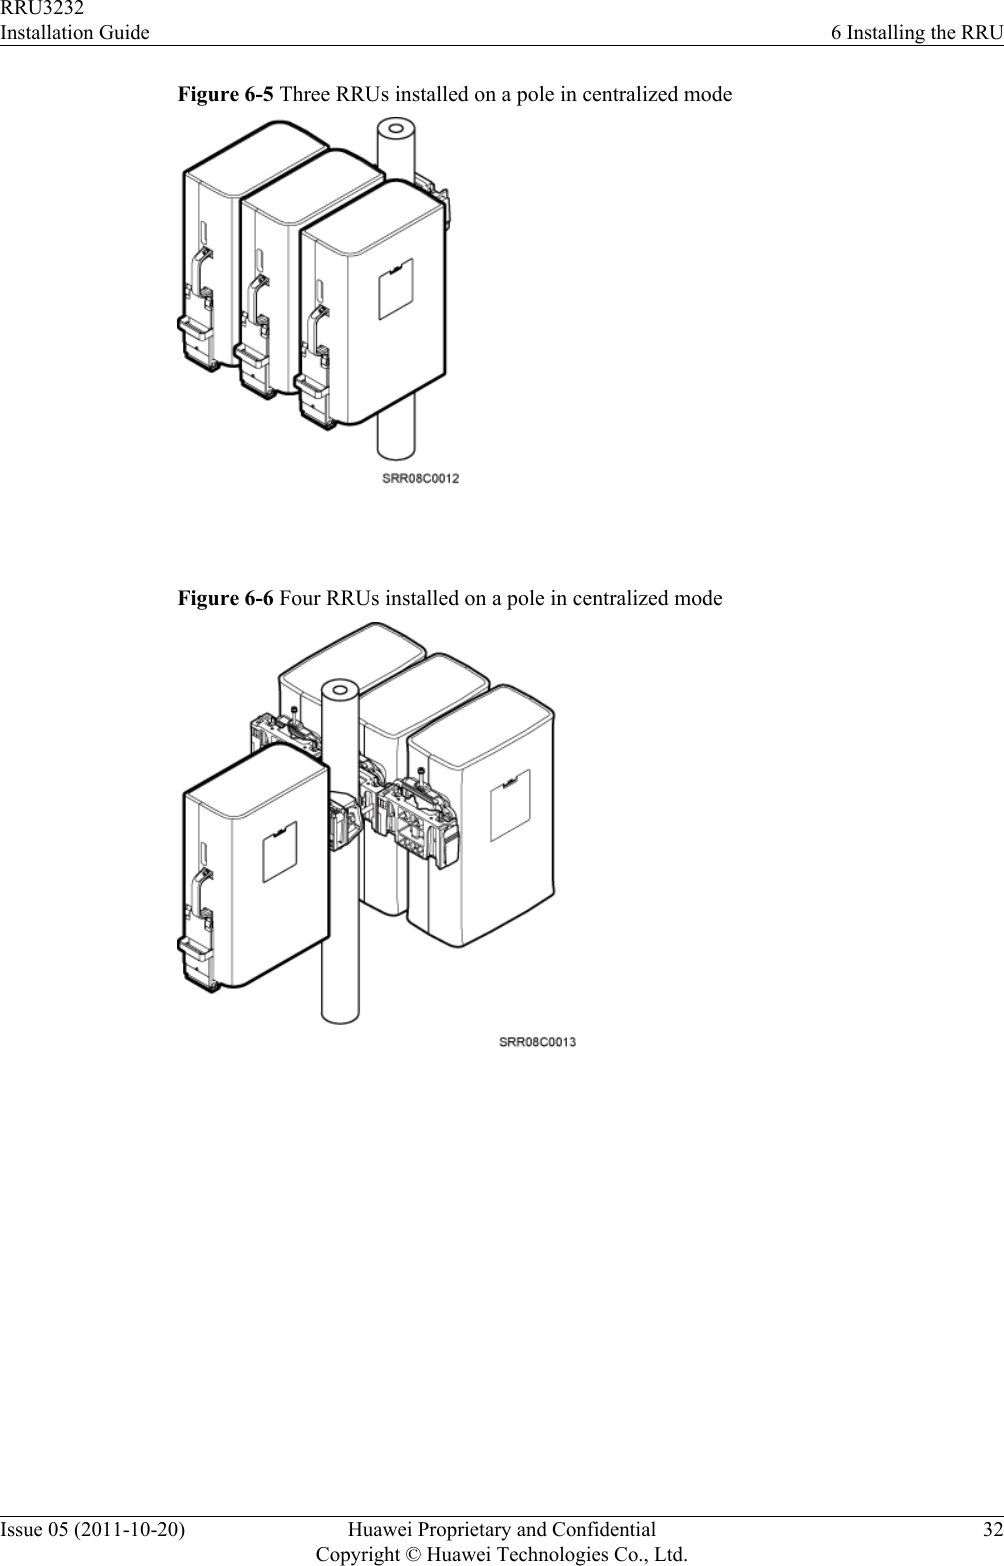 Figure 6-5 Three RRUs installed on a pole in centralized mode Figure 6-6 Four RRUs installed on a pole in centralized mode RRU3232Installation Guide 6 Installing the RRUIssue 05 (2011-10-20) Huawei Proprietary and ConfidentialCopyright © Huawei Technologies Co., Ltd.32